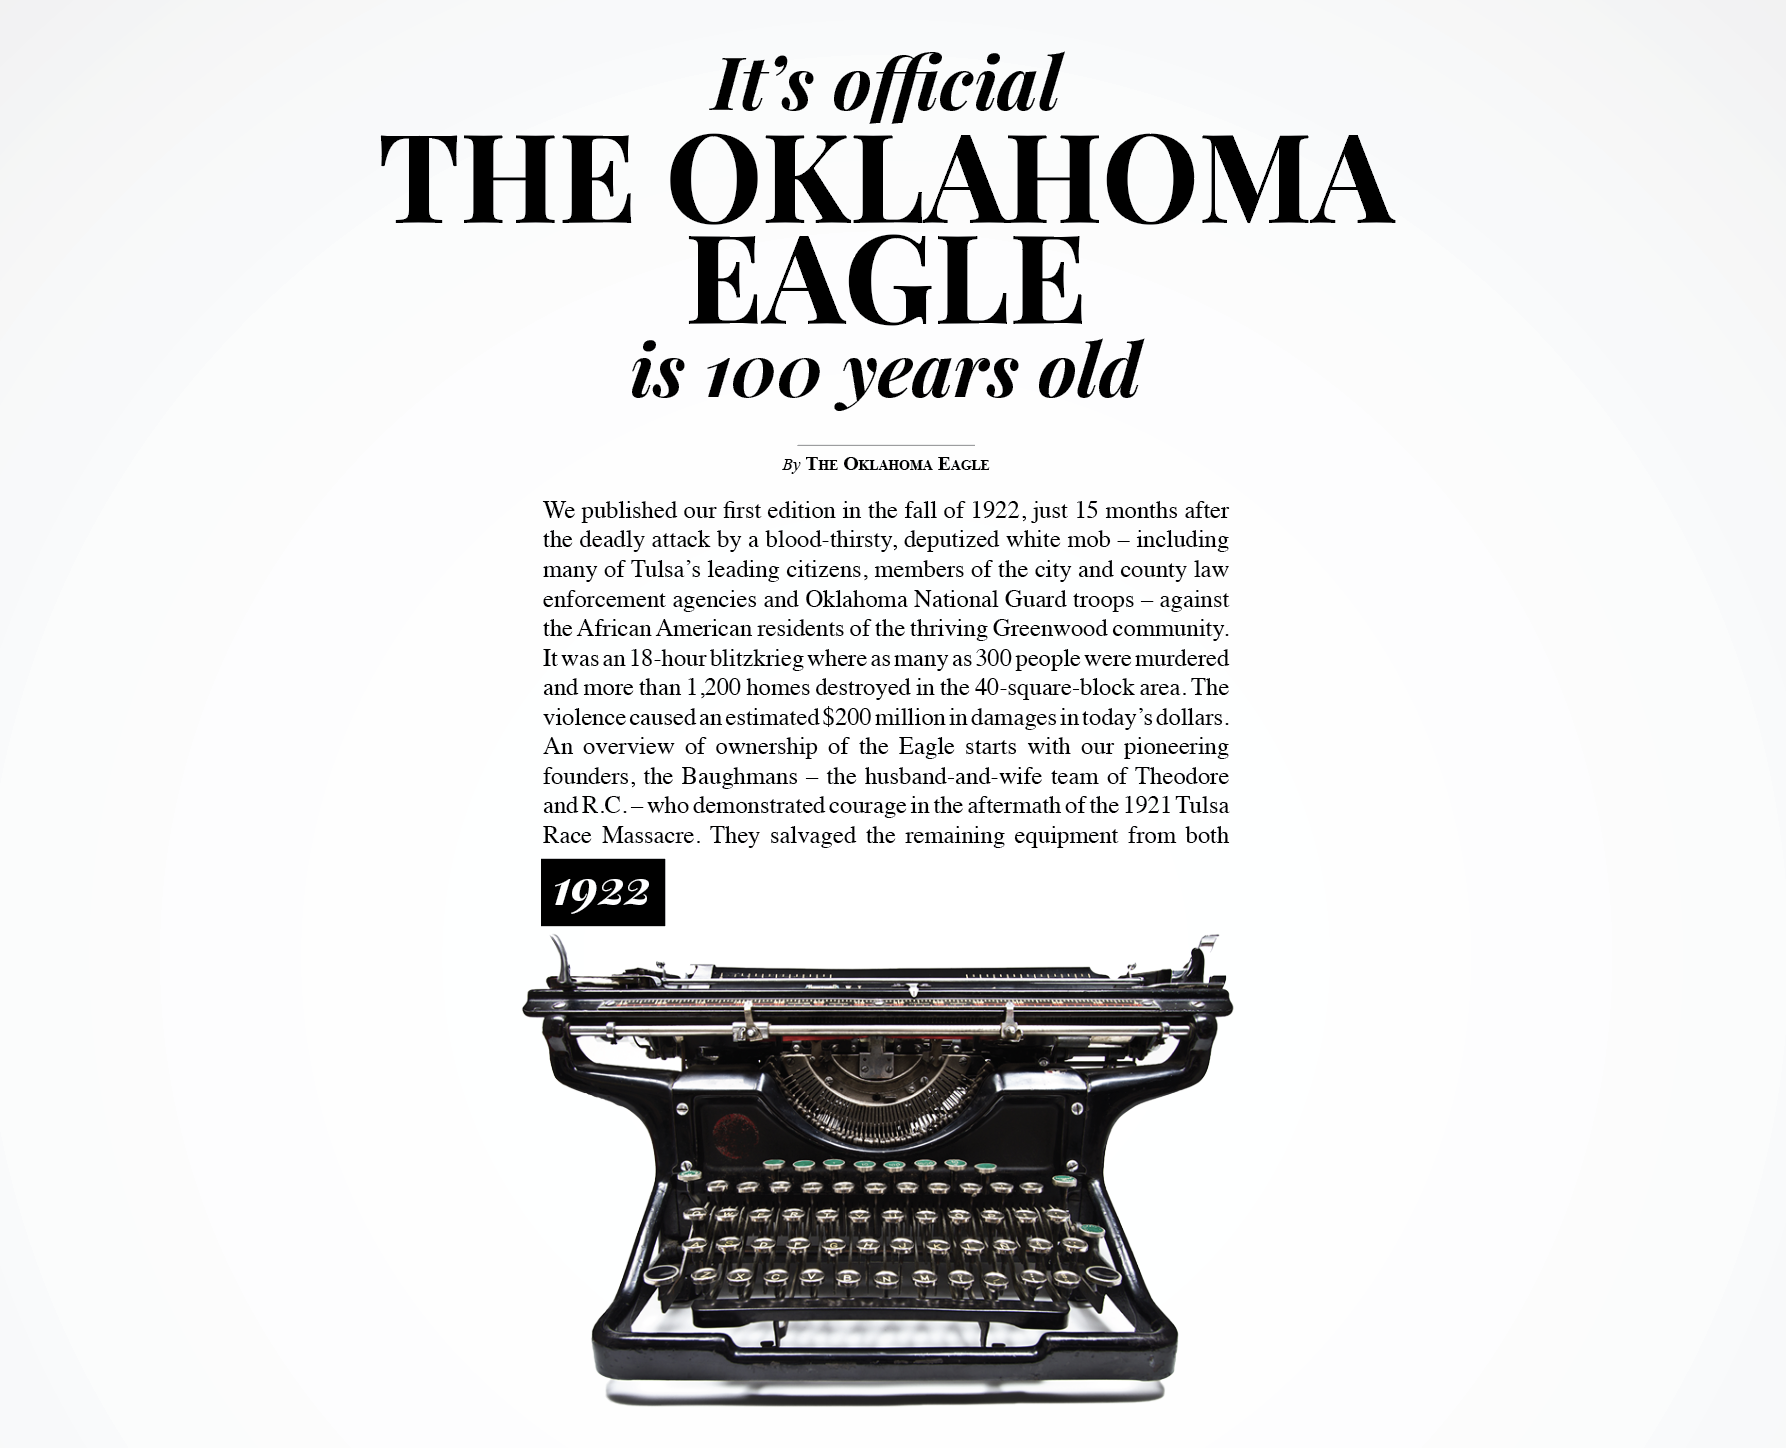 It’s Official, The Oklahoma Eagle Is 100 Years Old